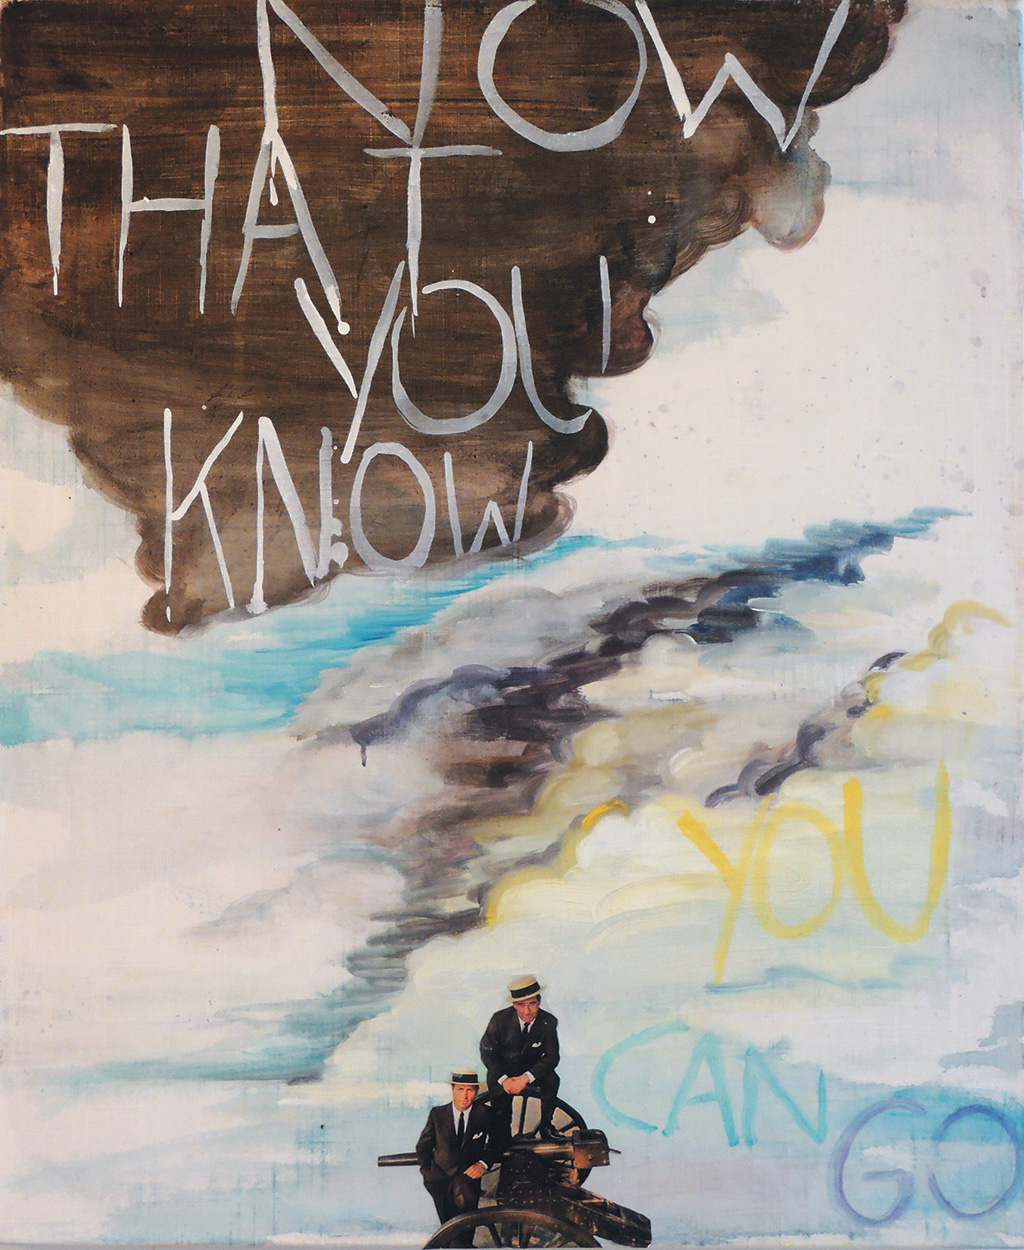 Carl Ferrero, “Now that you know,” 2015. Fabric paint, collage and oil on linen, 34 x 26"